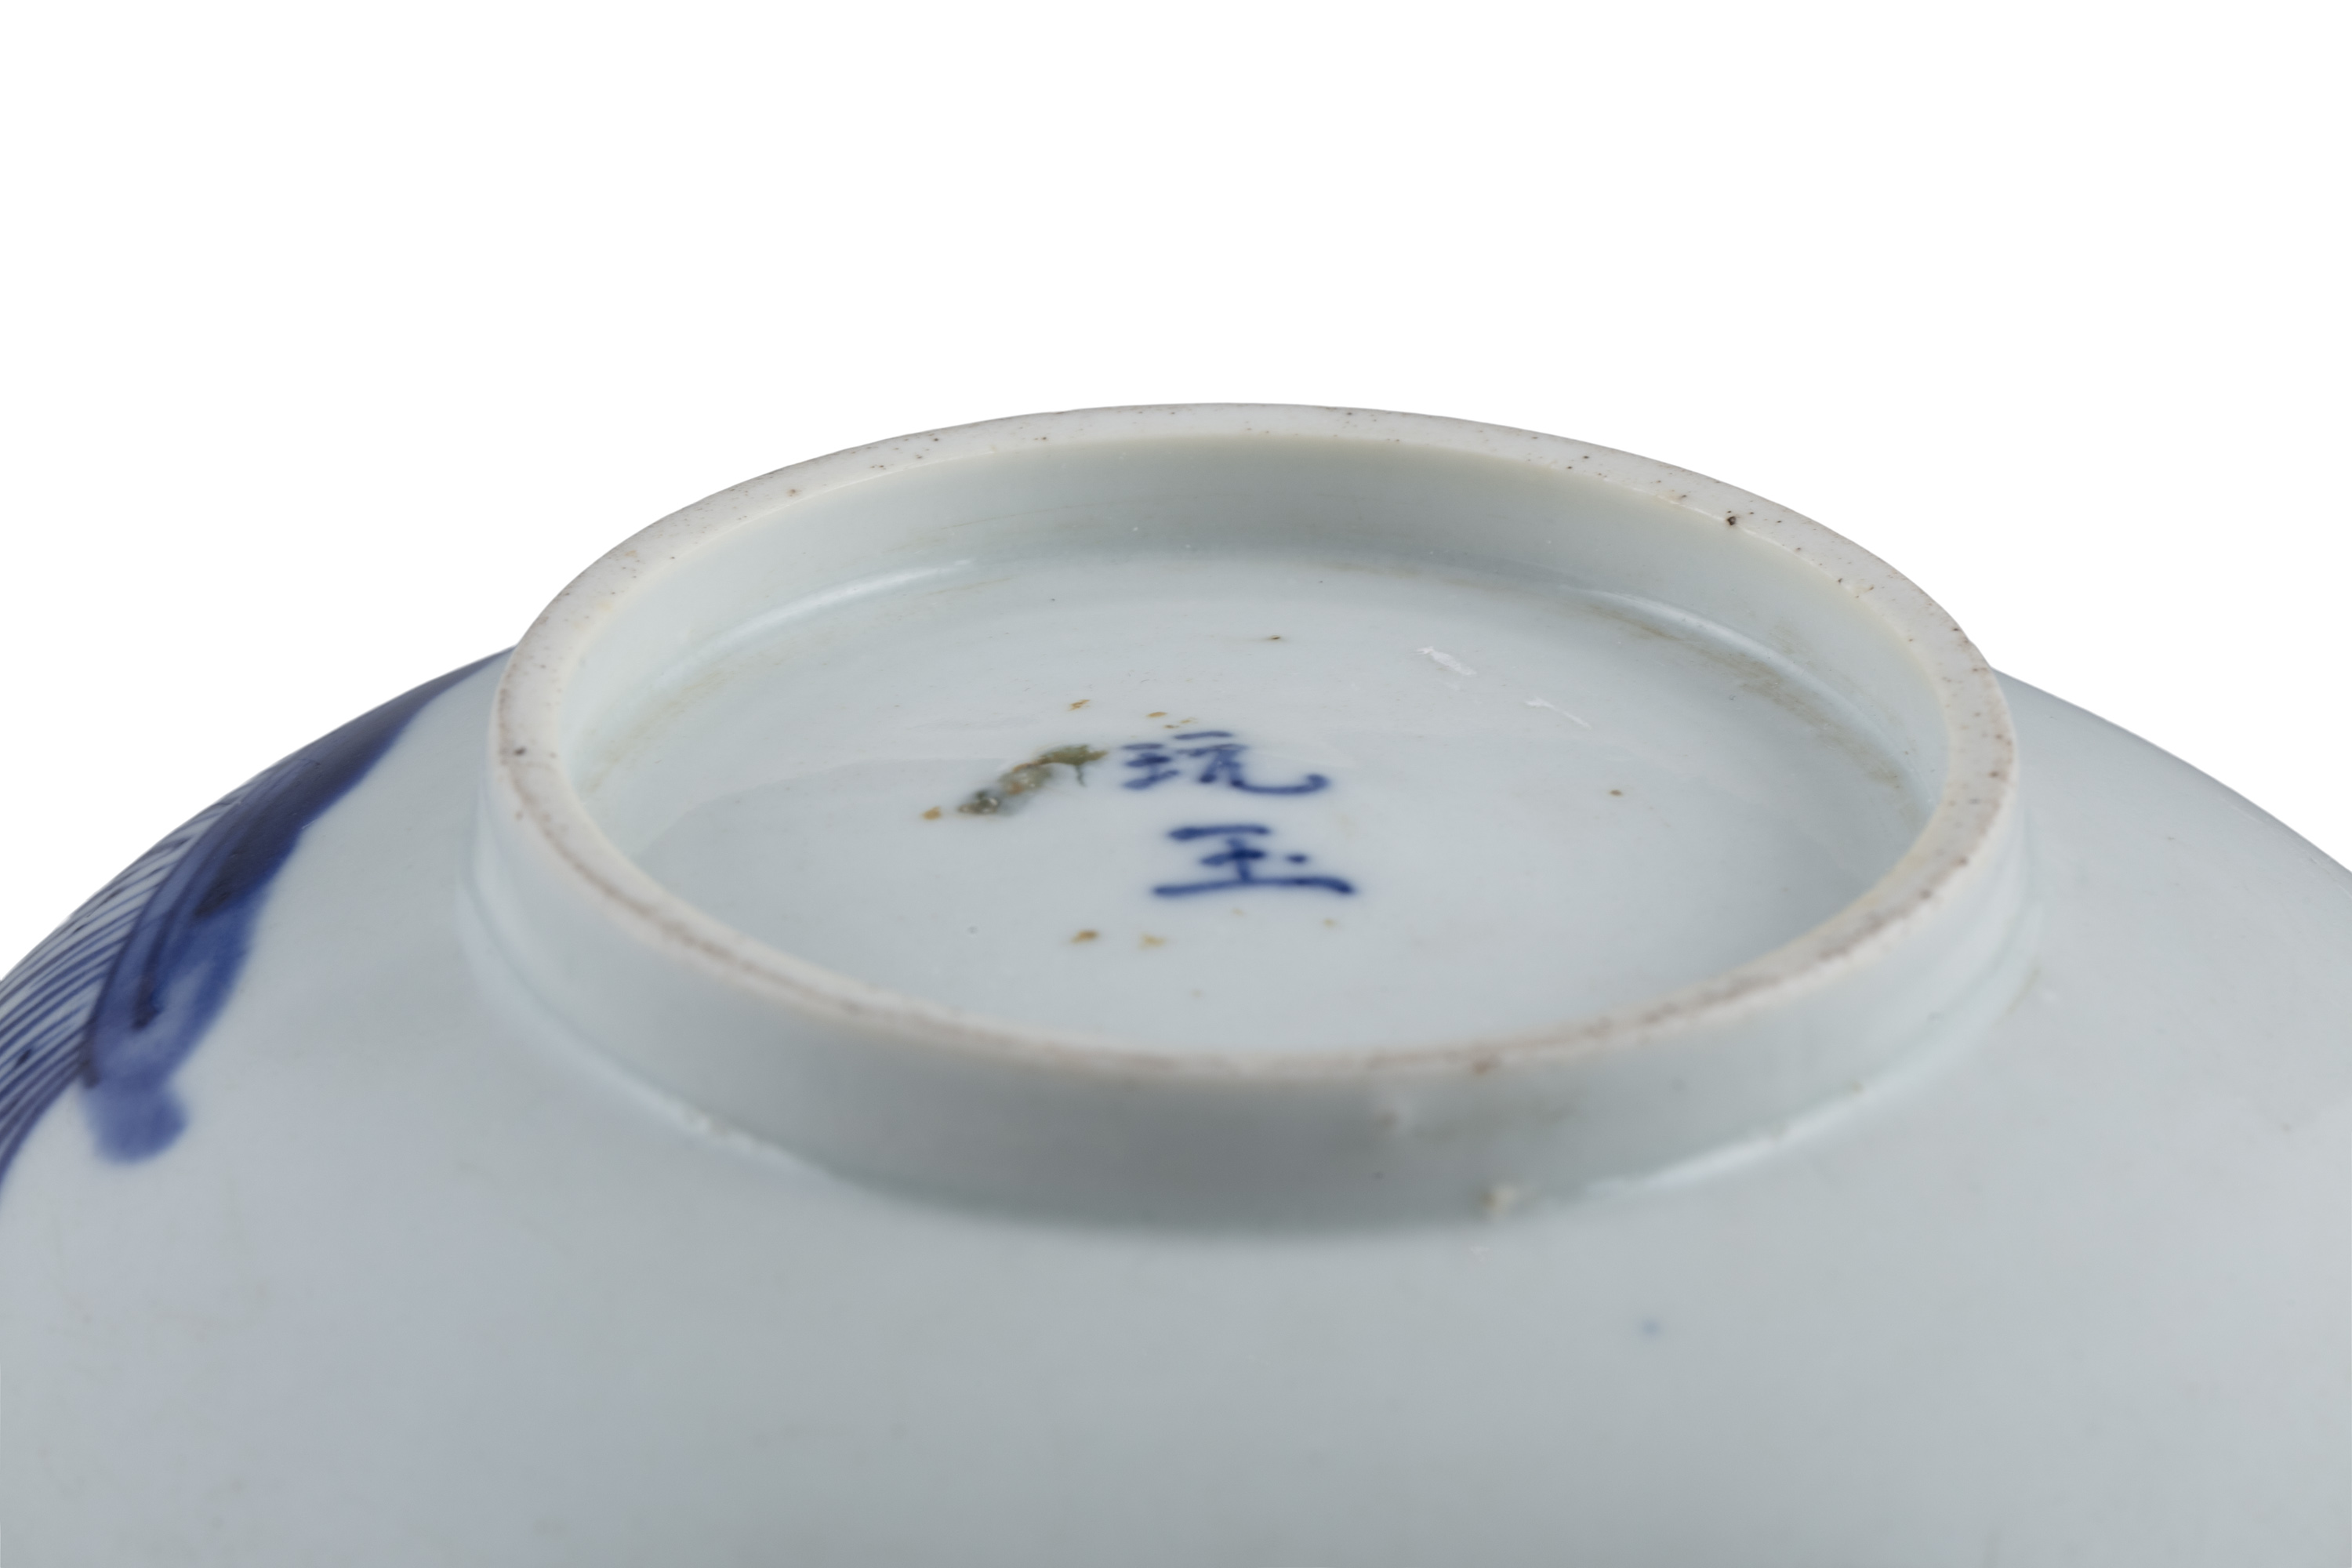 A BLEU DE HUE PORCELAIN BOWL ‘CRAB AND LOTUS POND’ BOWL INSCRIBED WITH THE MARK NGOẠN NGỌC 玩玉 - Image 18 of 18